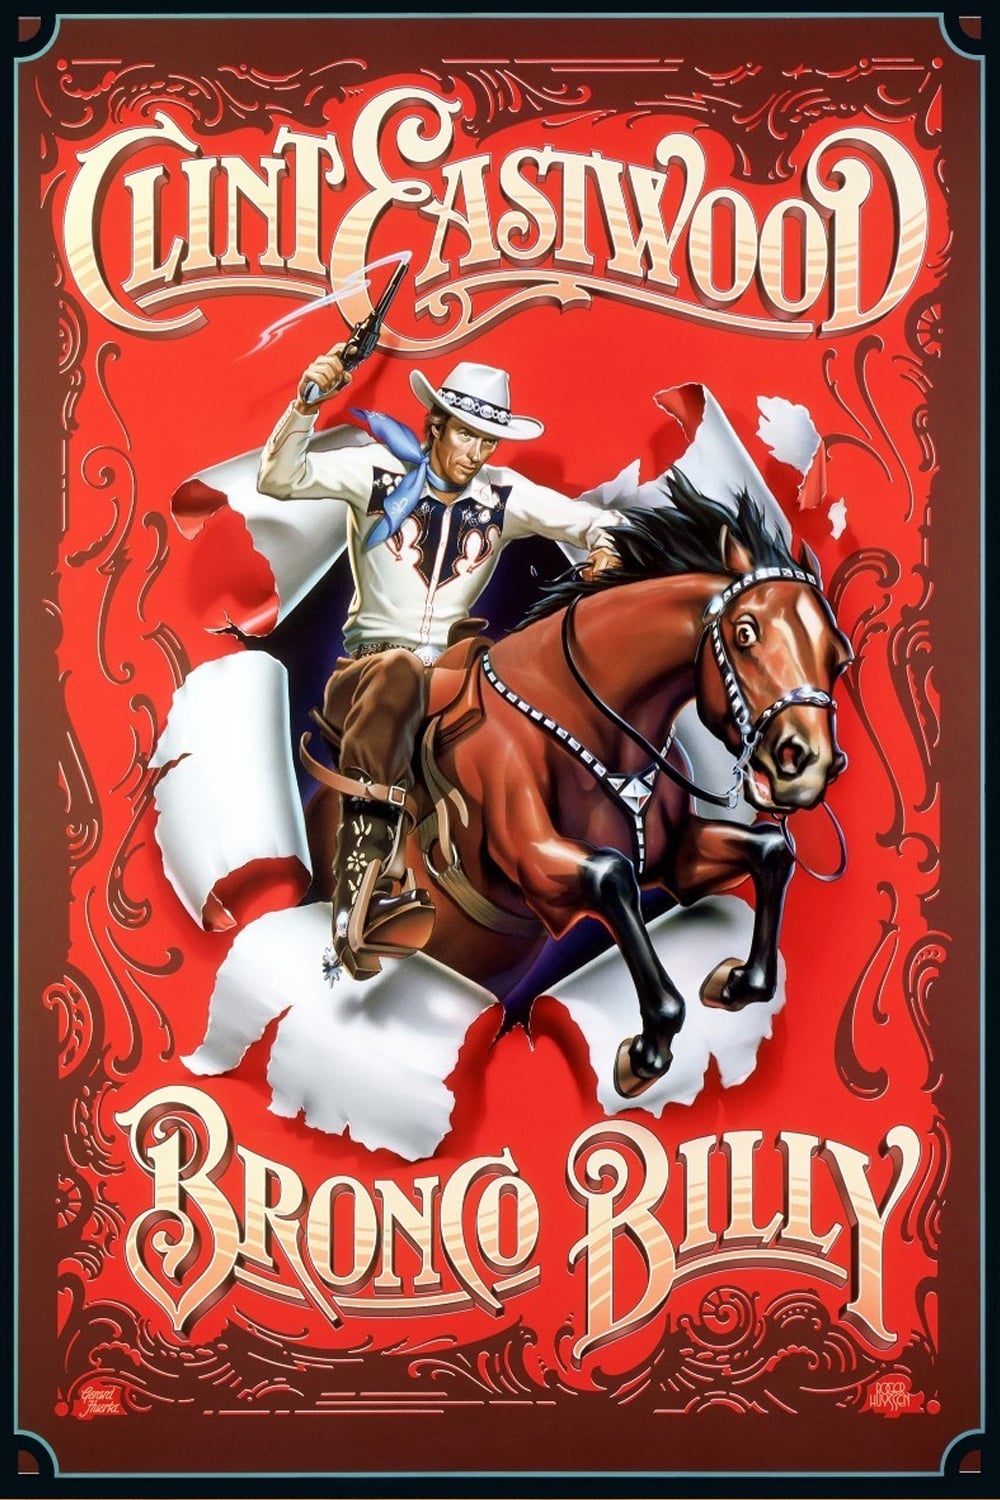 Poster for the movie "Bronco Billy"